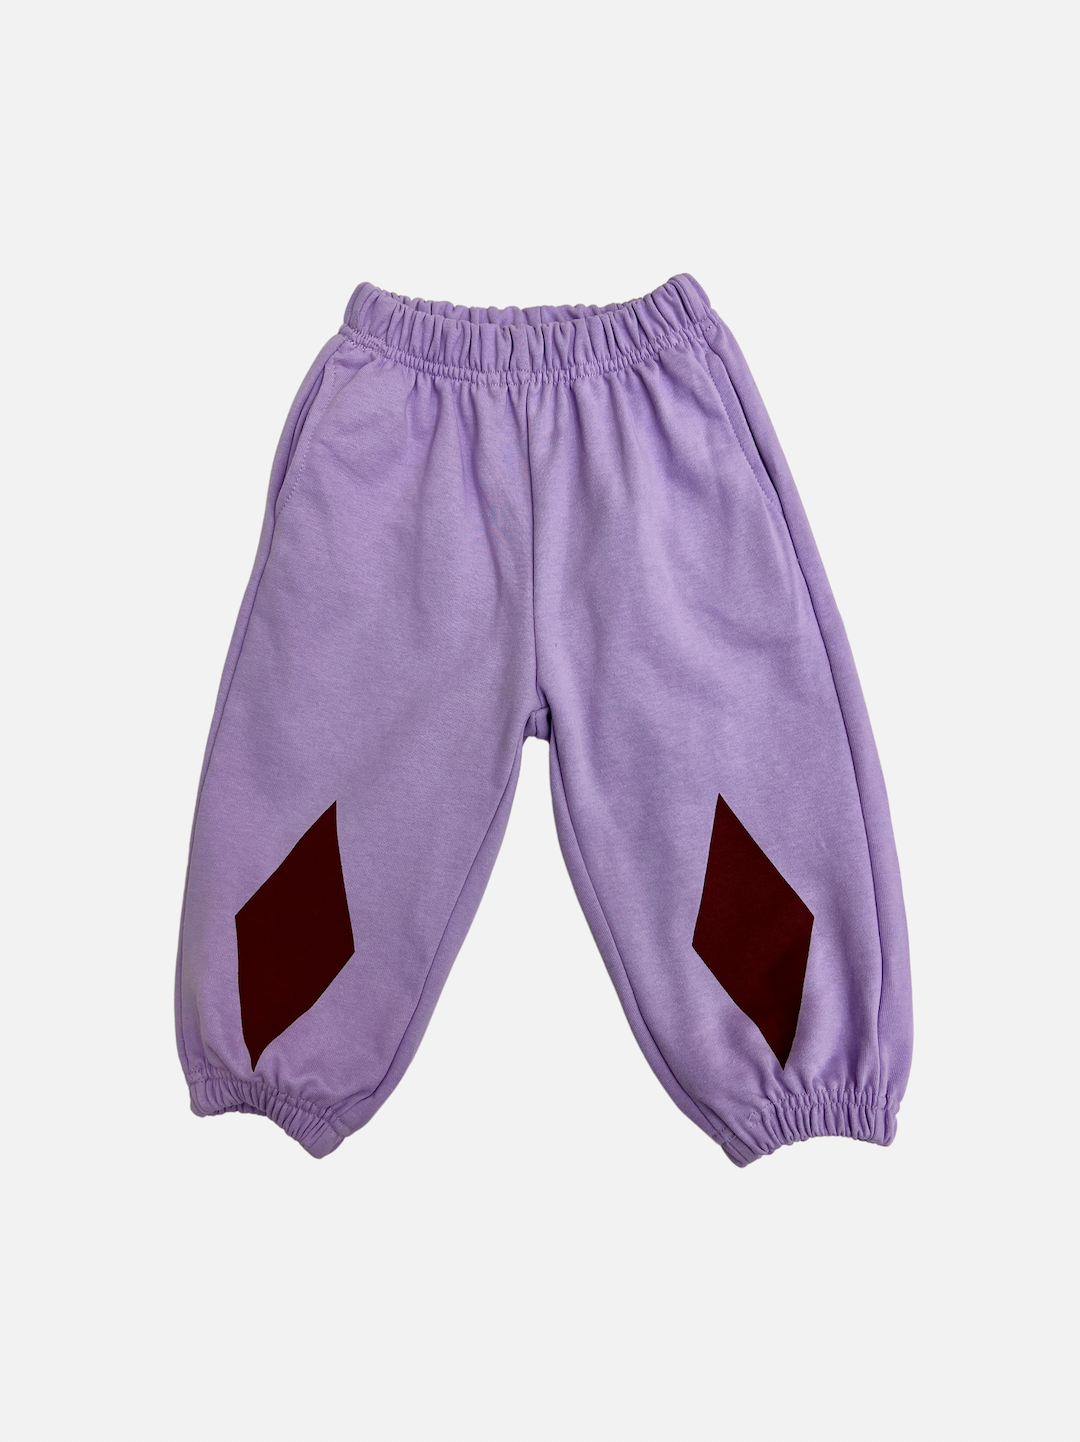 Purple | A pair of kids' sweatpants in pale purple with dark red diamond patches at the knees